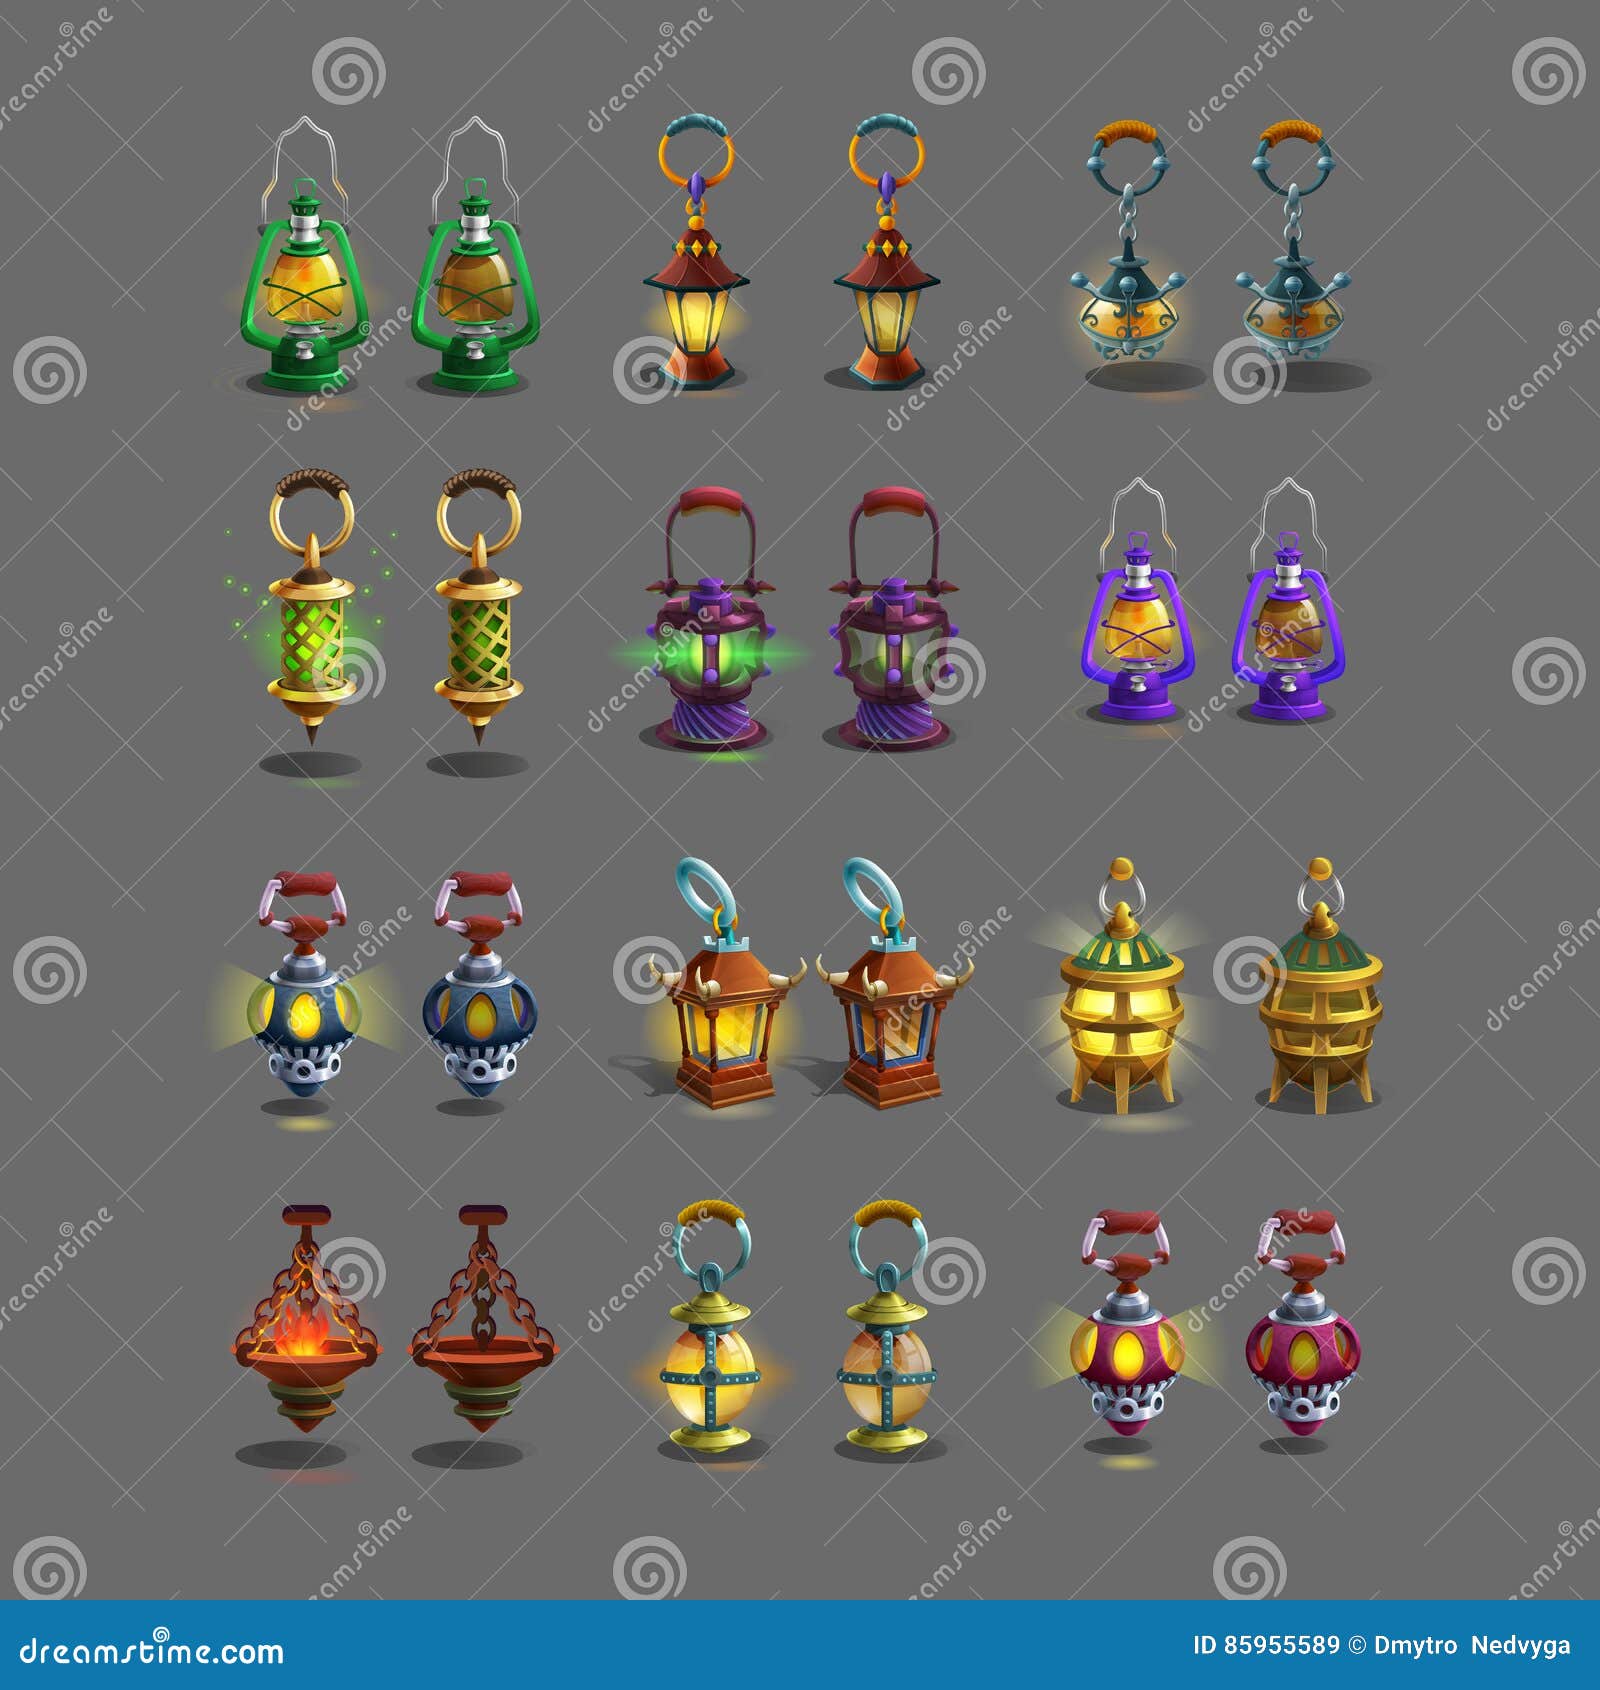 ?artoon set colorful ancient lamps for fantasy games.